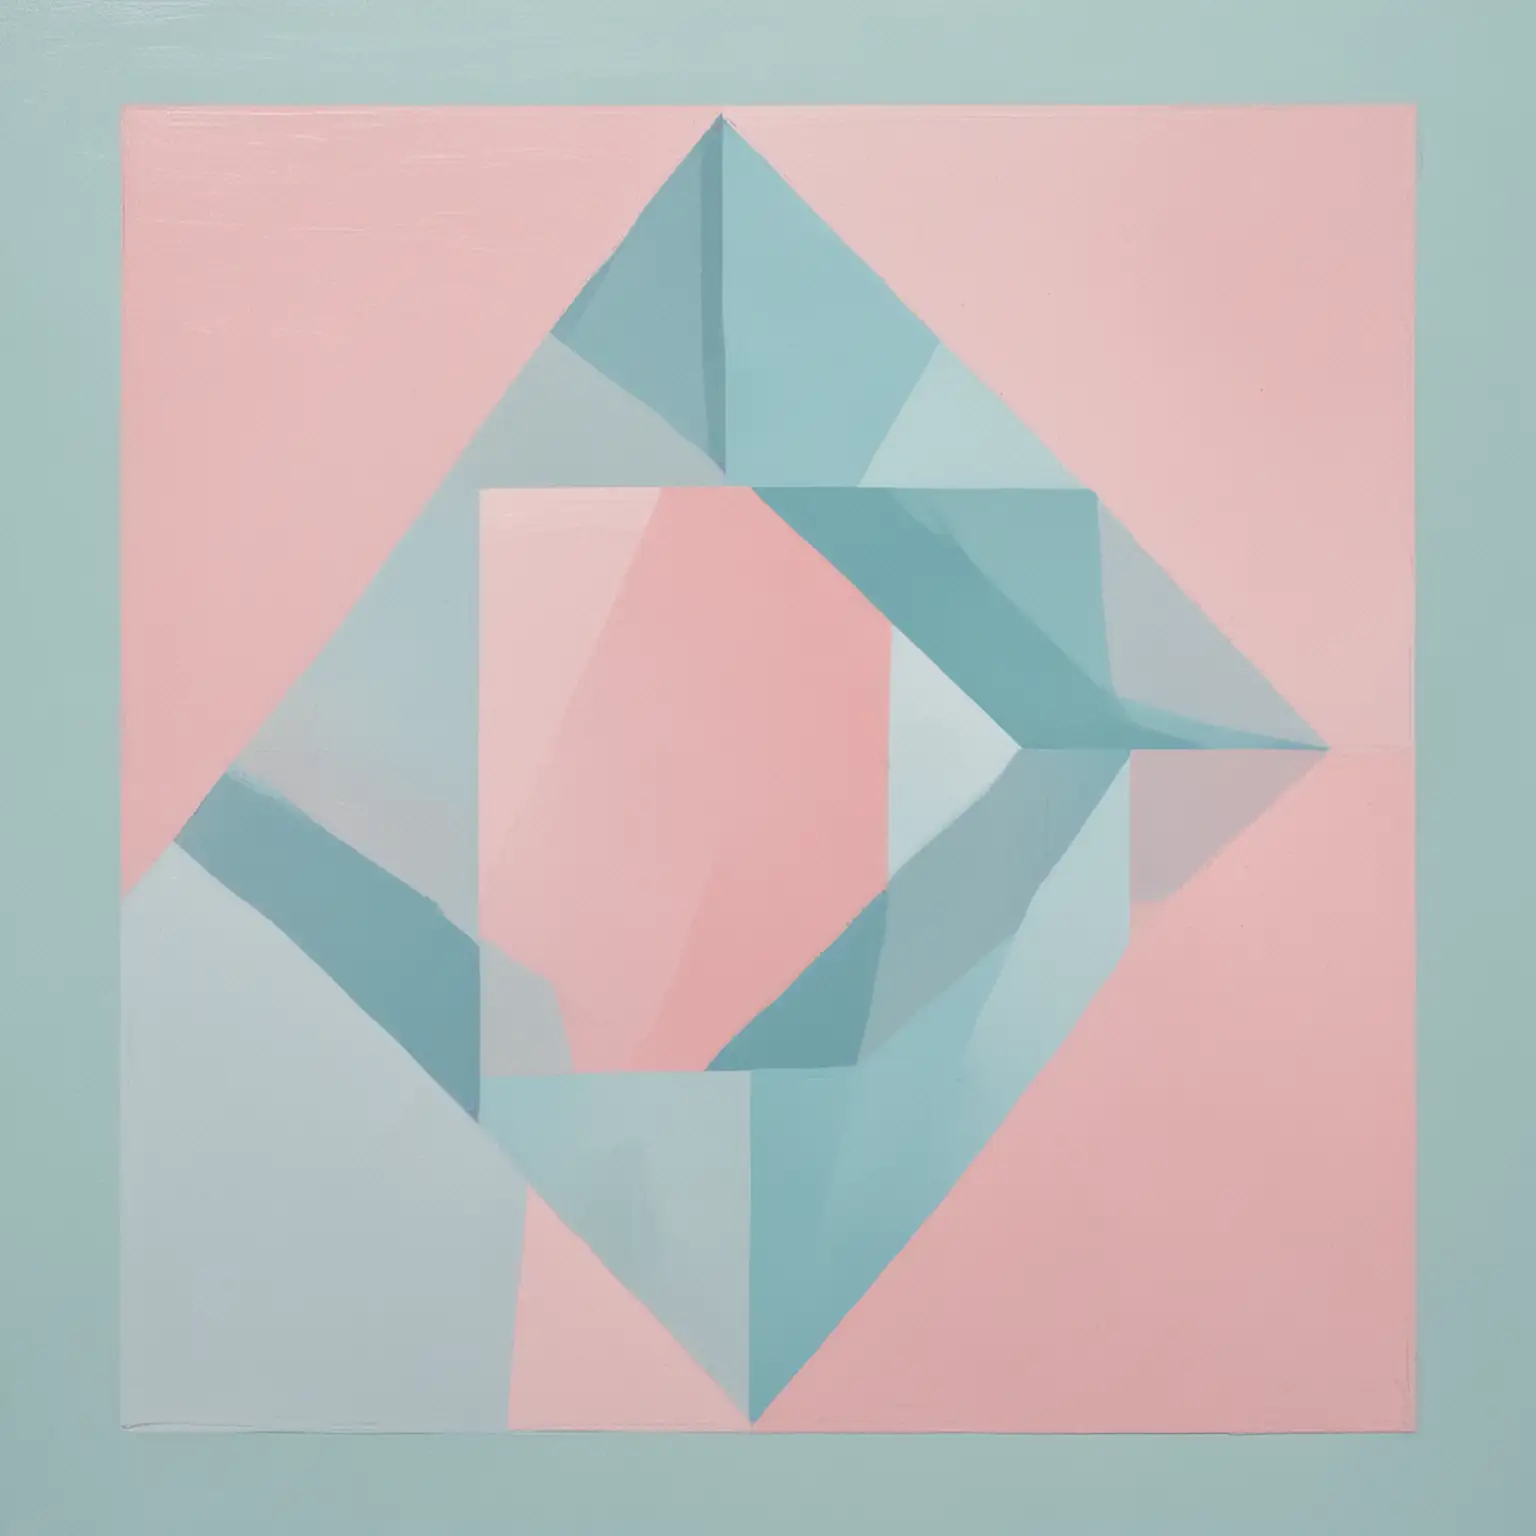 An illustration of an abstract geometric painting in baby pink and baby blue